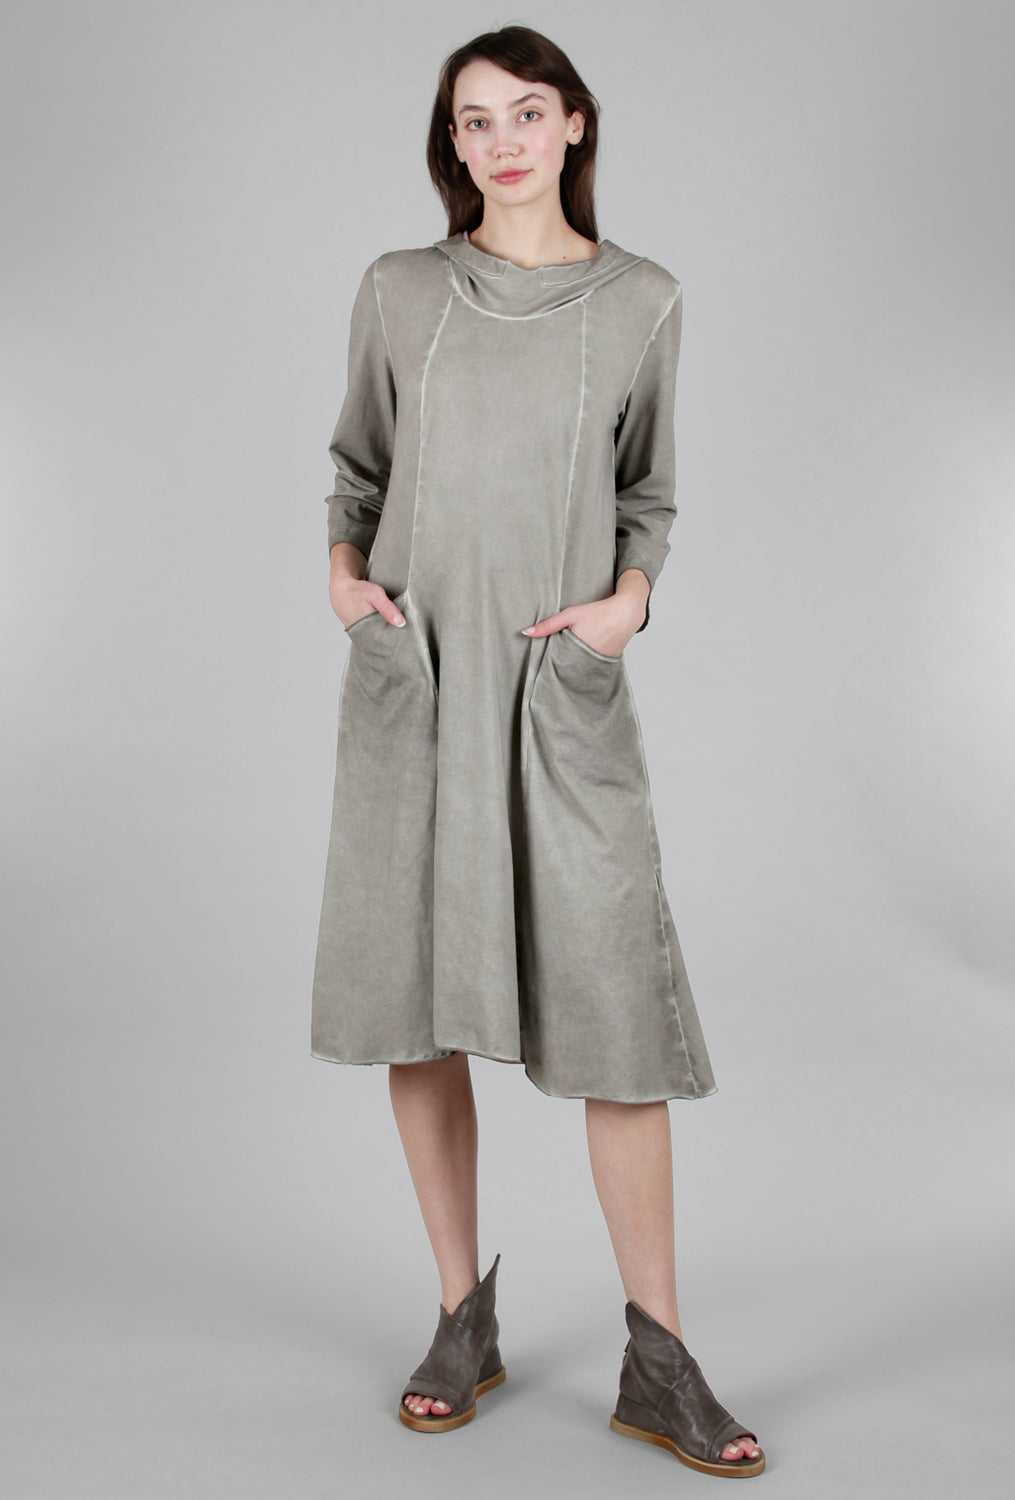 Grizas Garment-Dyed Hoodie Dress, Taupe 